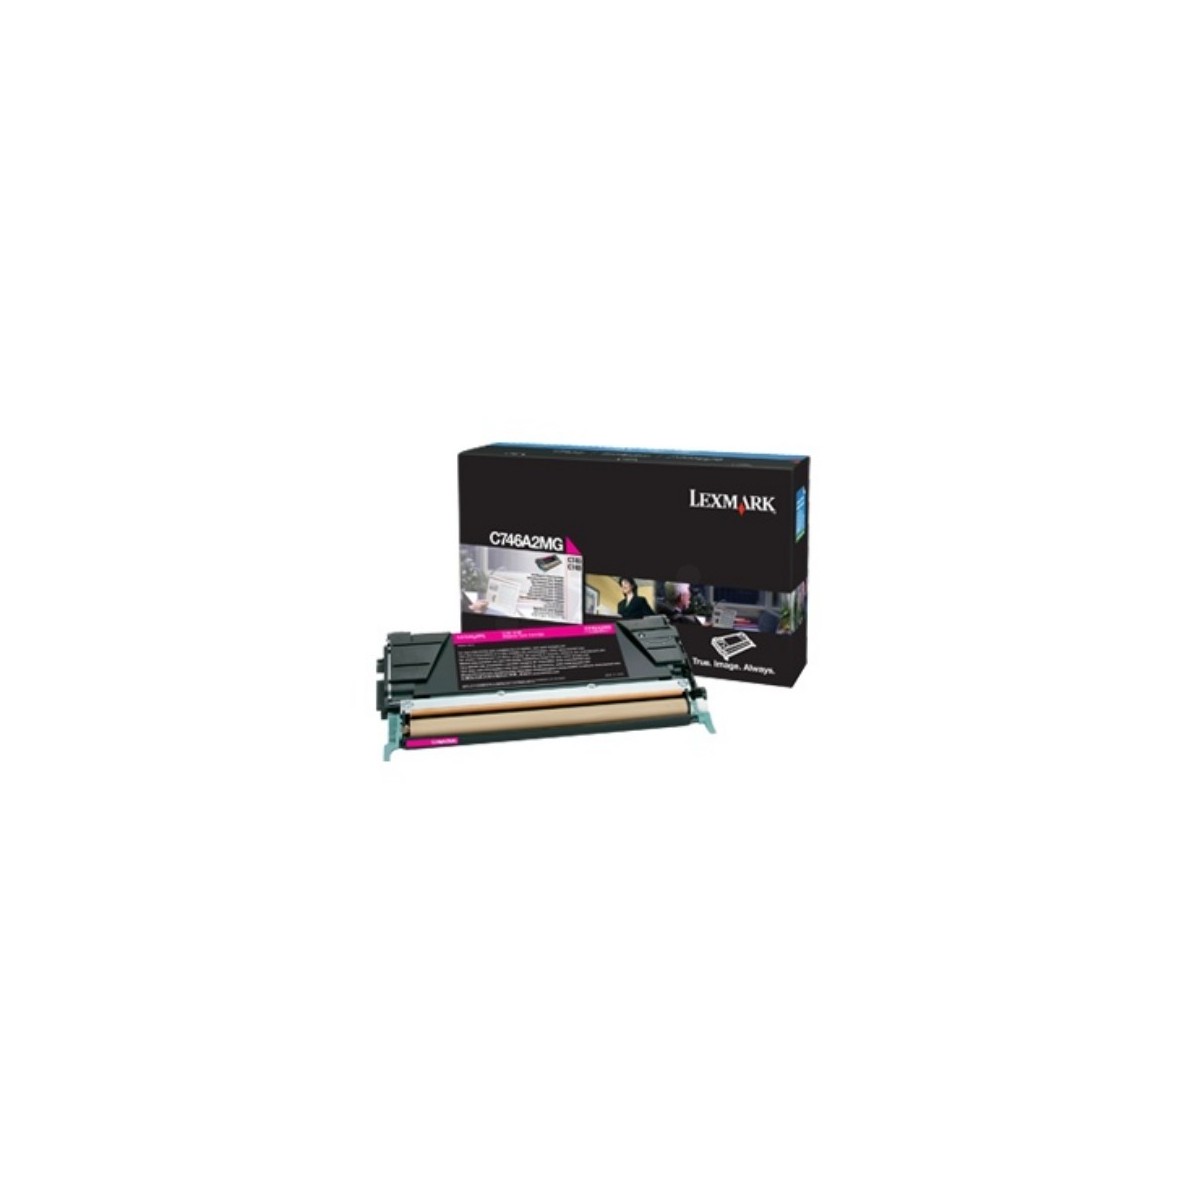 Lexmark C746A3MG - 7000 pages - Magenta - 1 pc(s)